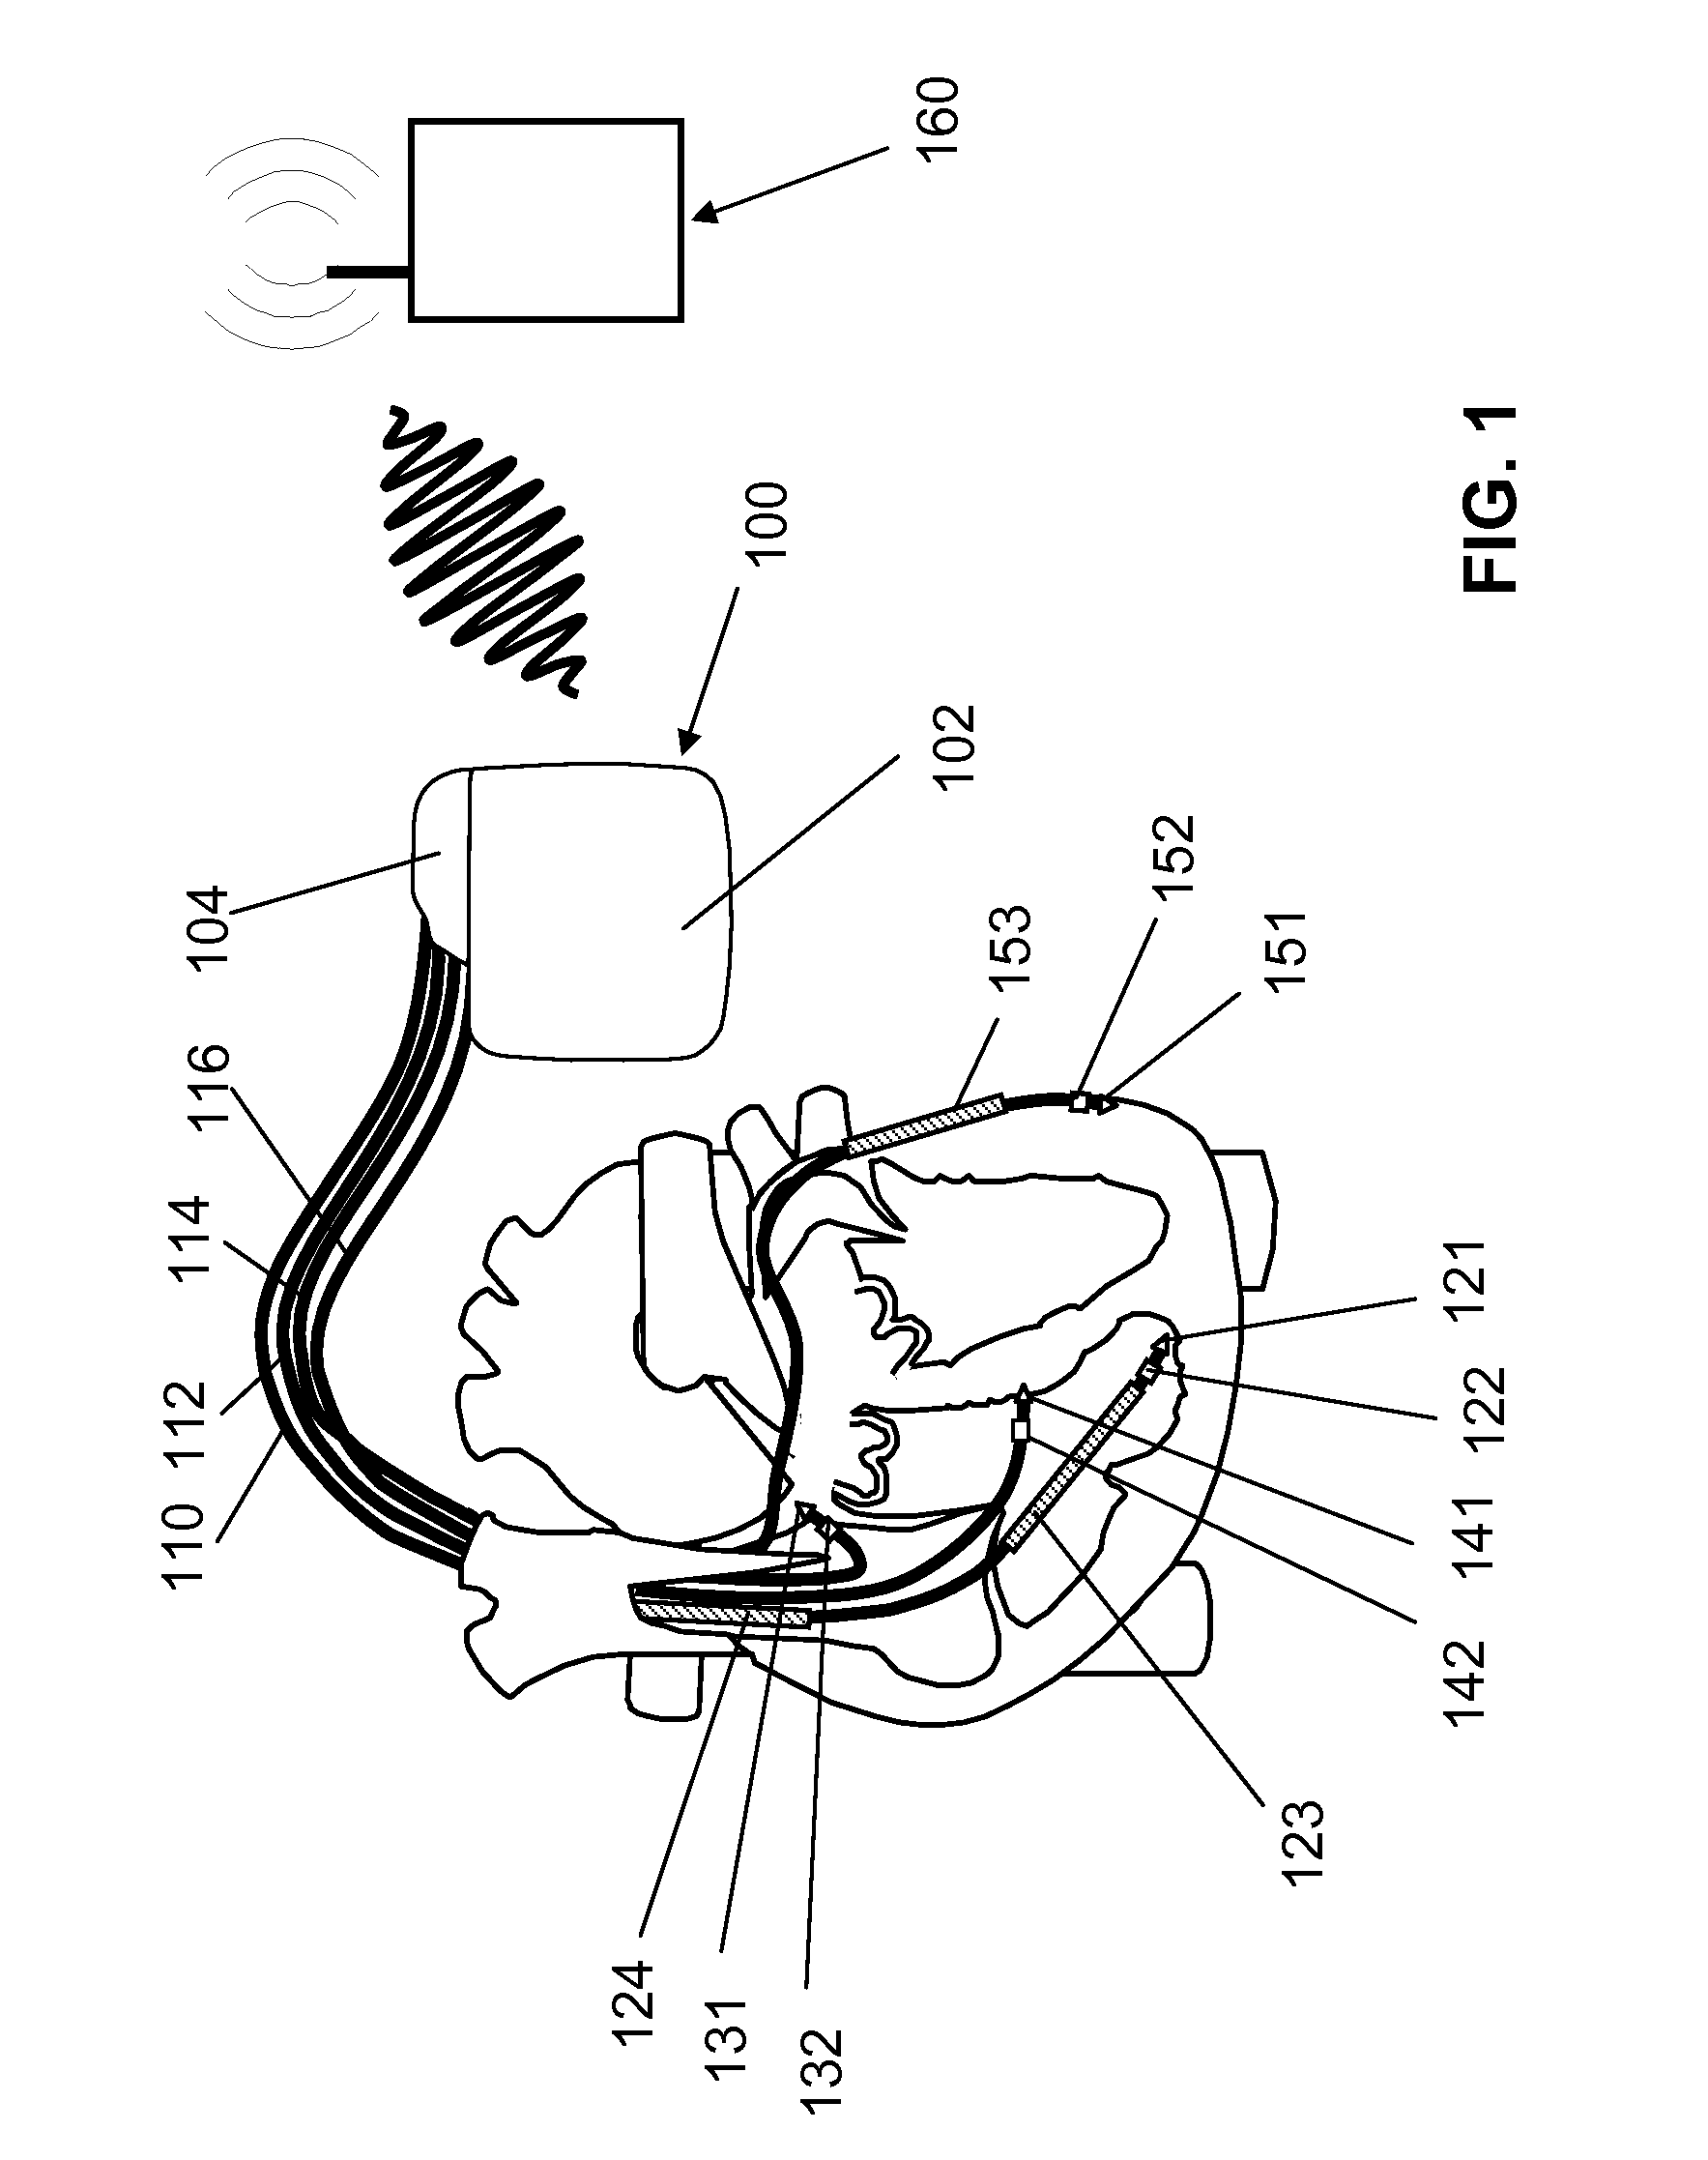 Cardiac stimulator for delivery of cardiac contractility modulation therapy